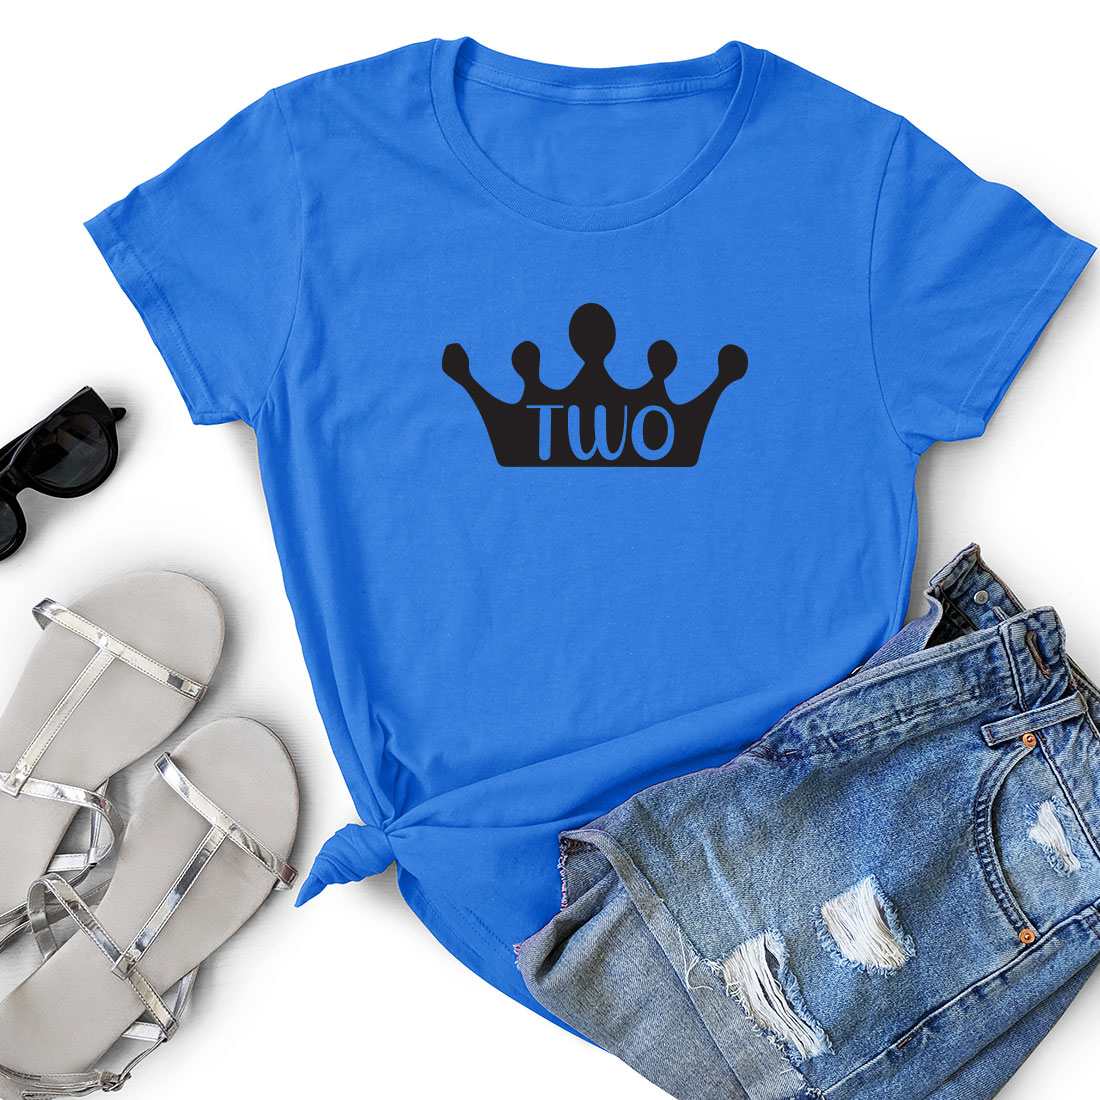 Blue shirt with a crown on it.